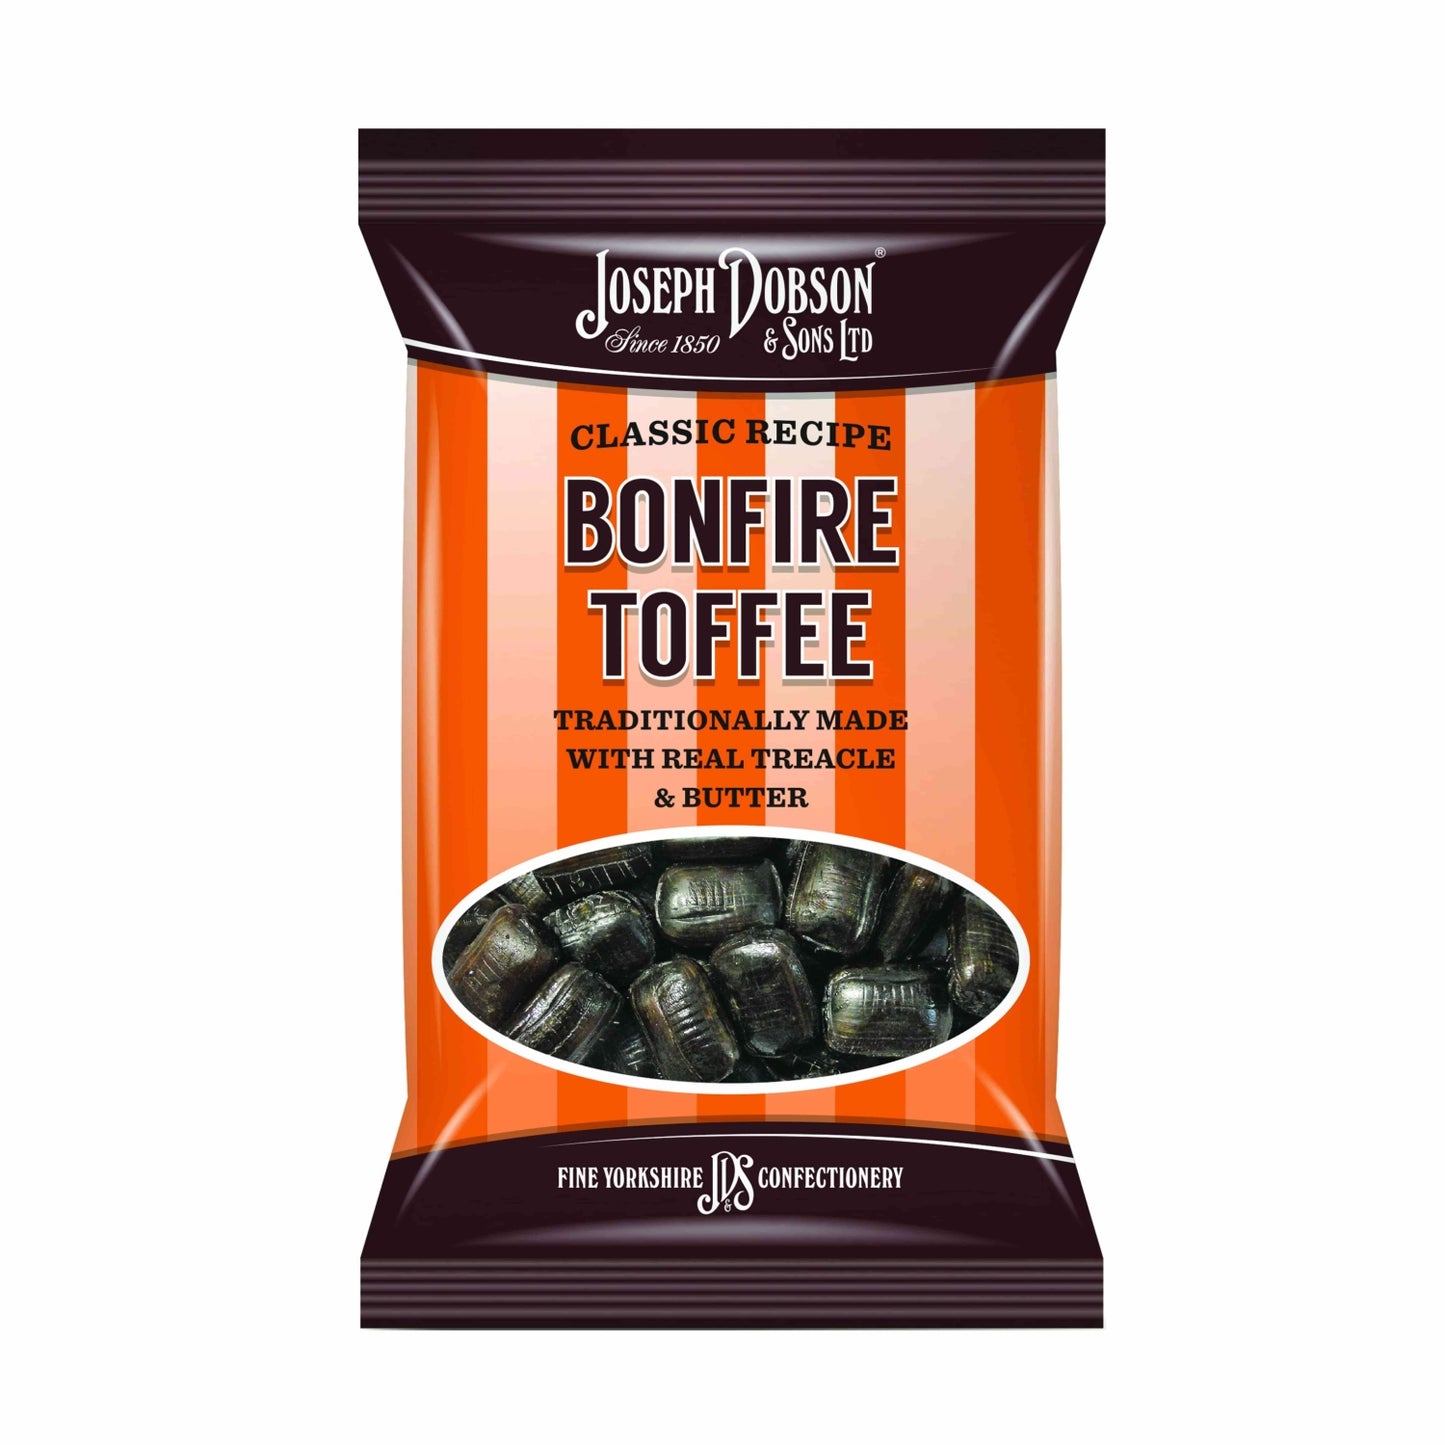 Classic Bonfire Toffee 200g - The Great Yorkshire Shop